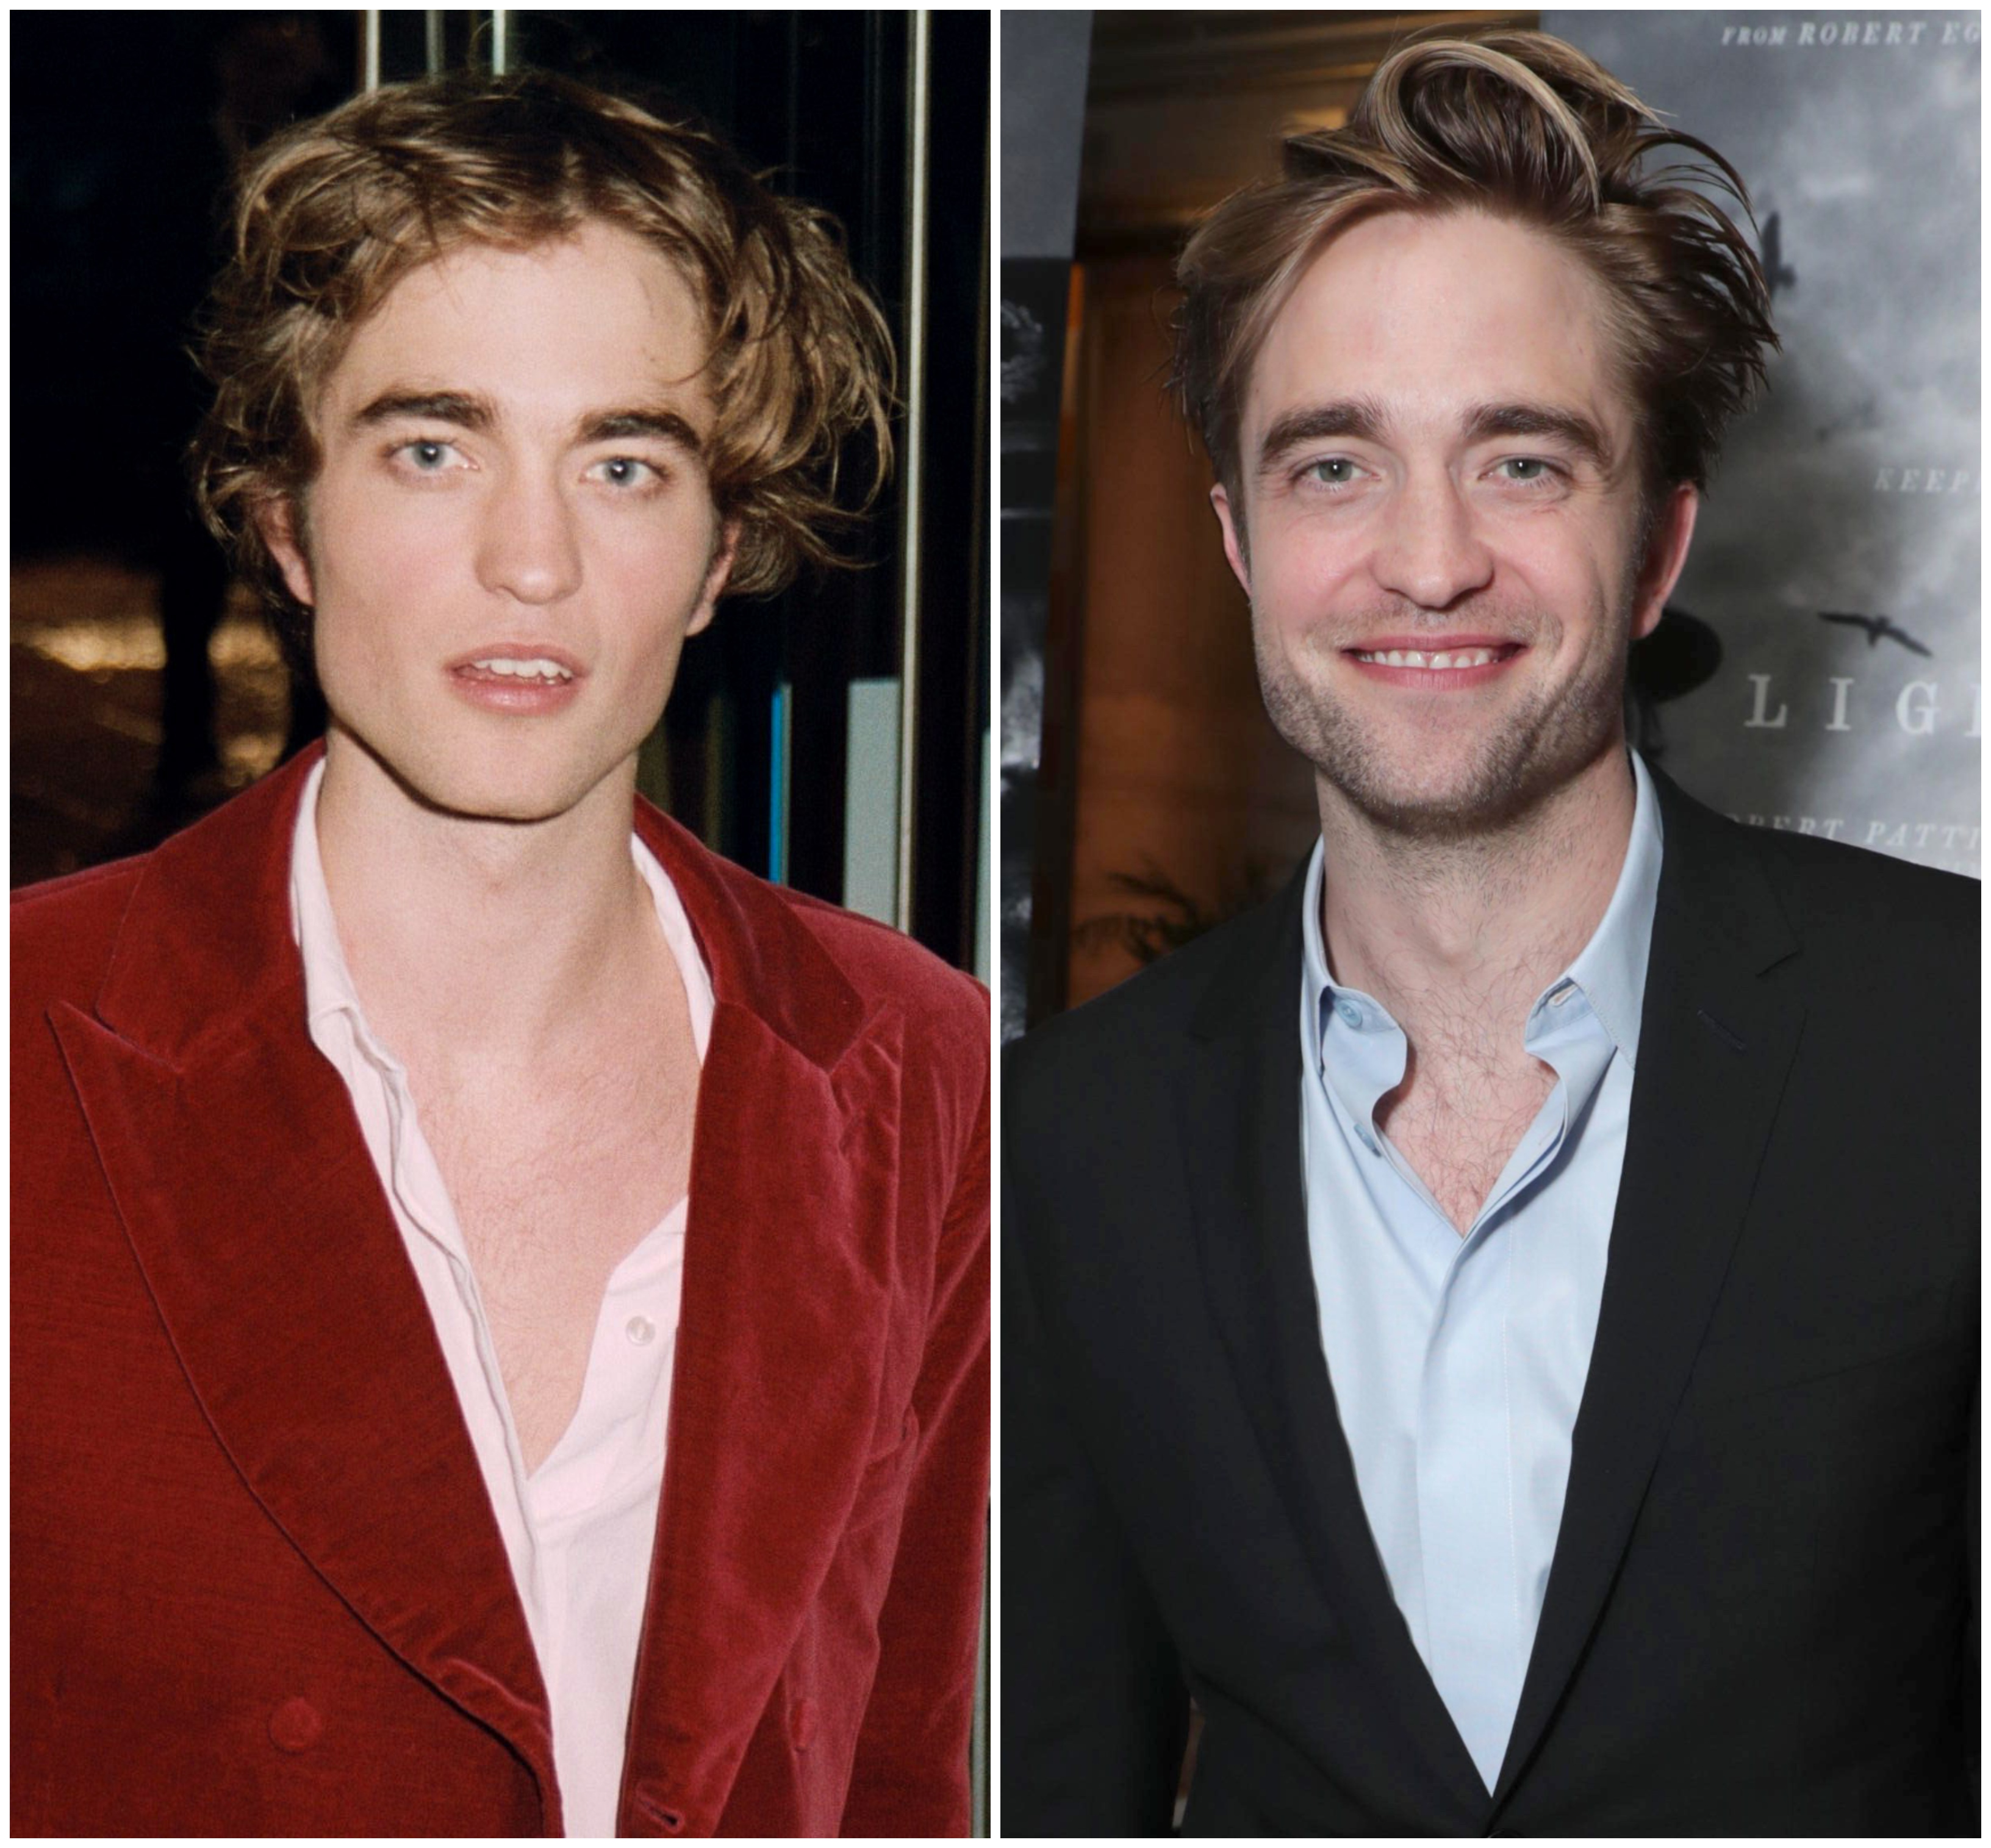 Robert Pattinson's Transformation From 'Twilight' to Now Photos